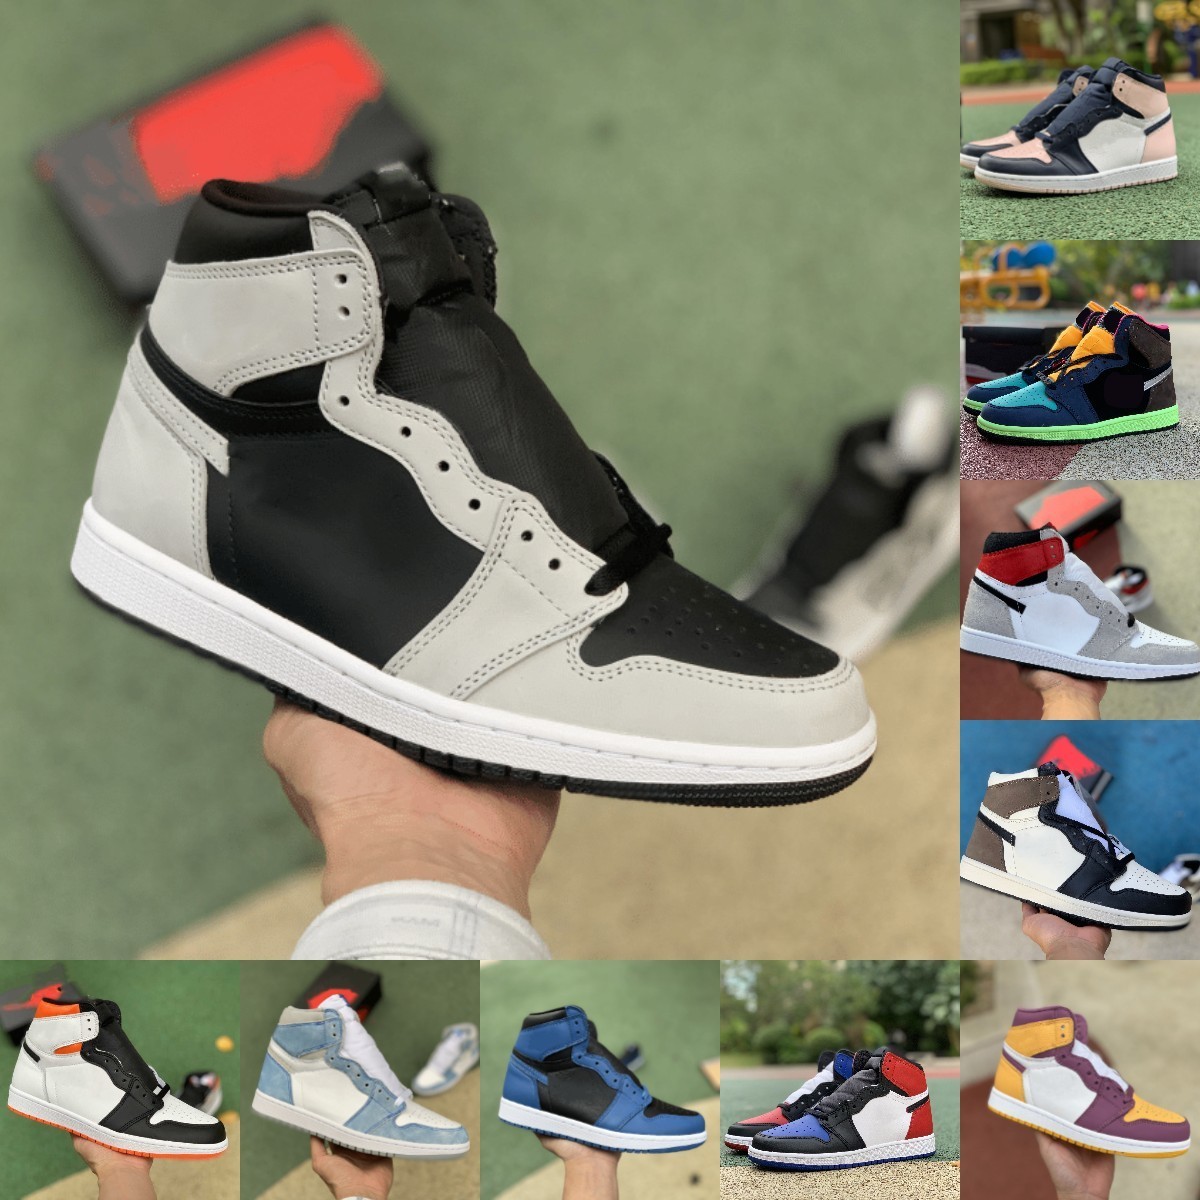 

Jumpman Bio Hack 1 1s High Basketball Shoes Mens Women Shadow 2.0 Bred Patent Unc Pollen Hyper Royal Banned Chicago Black Toe DARK MOCHA Trainer Sneakers Designer, Please contact us